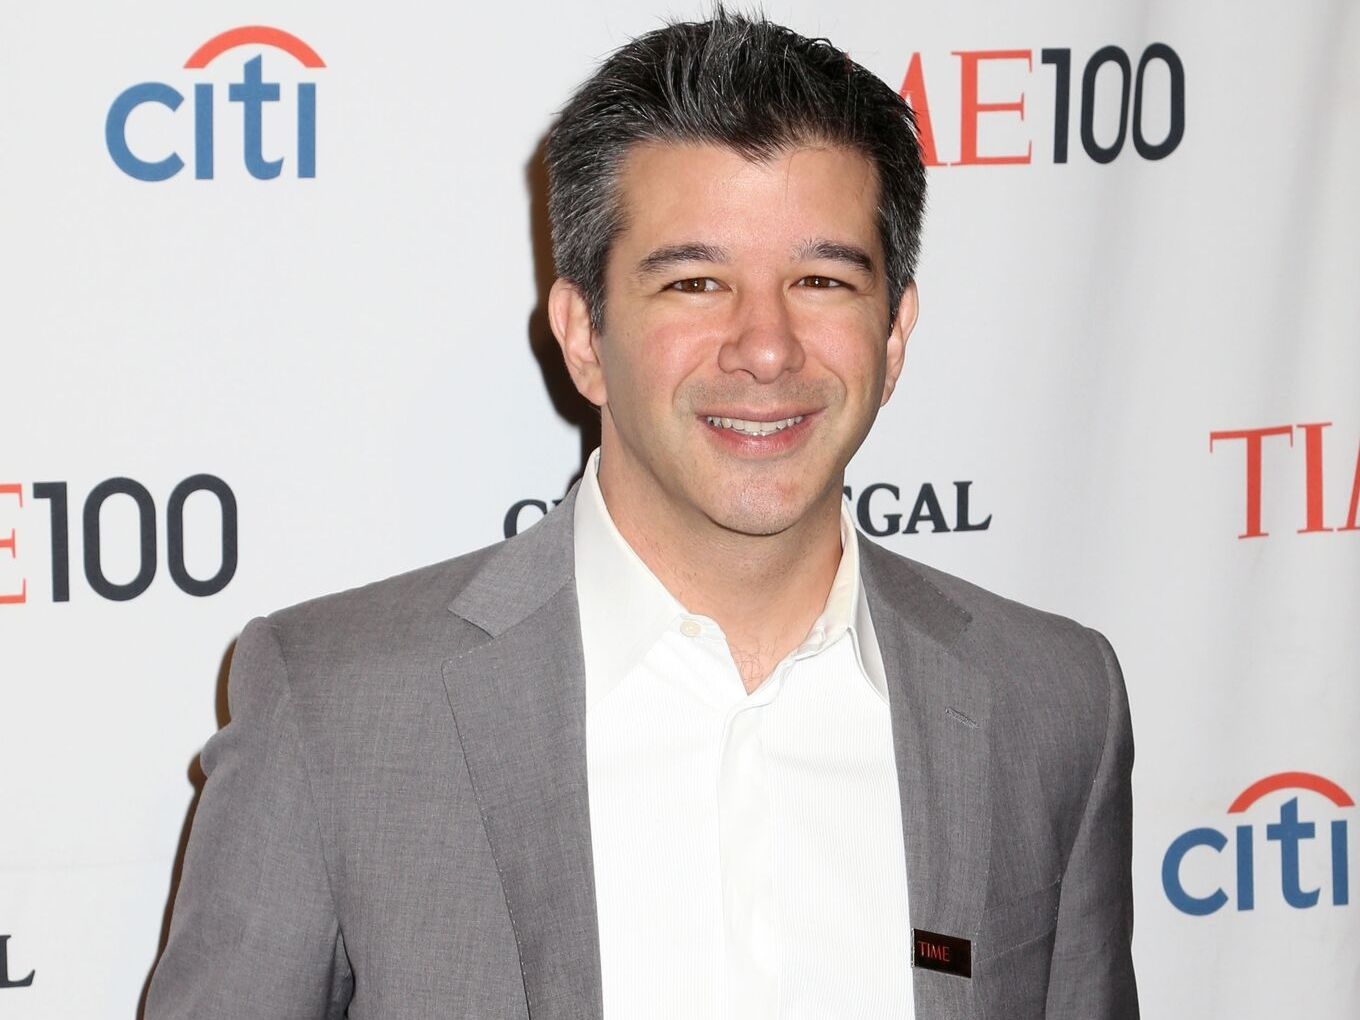 Uber Cofounder Travis Kalanick Likely To Invest $125 Mn In Cloud Kitchen Rebel Foods